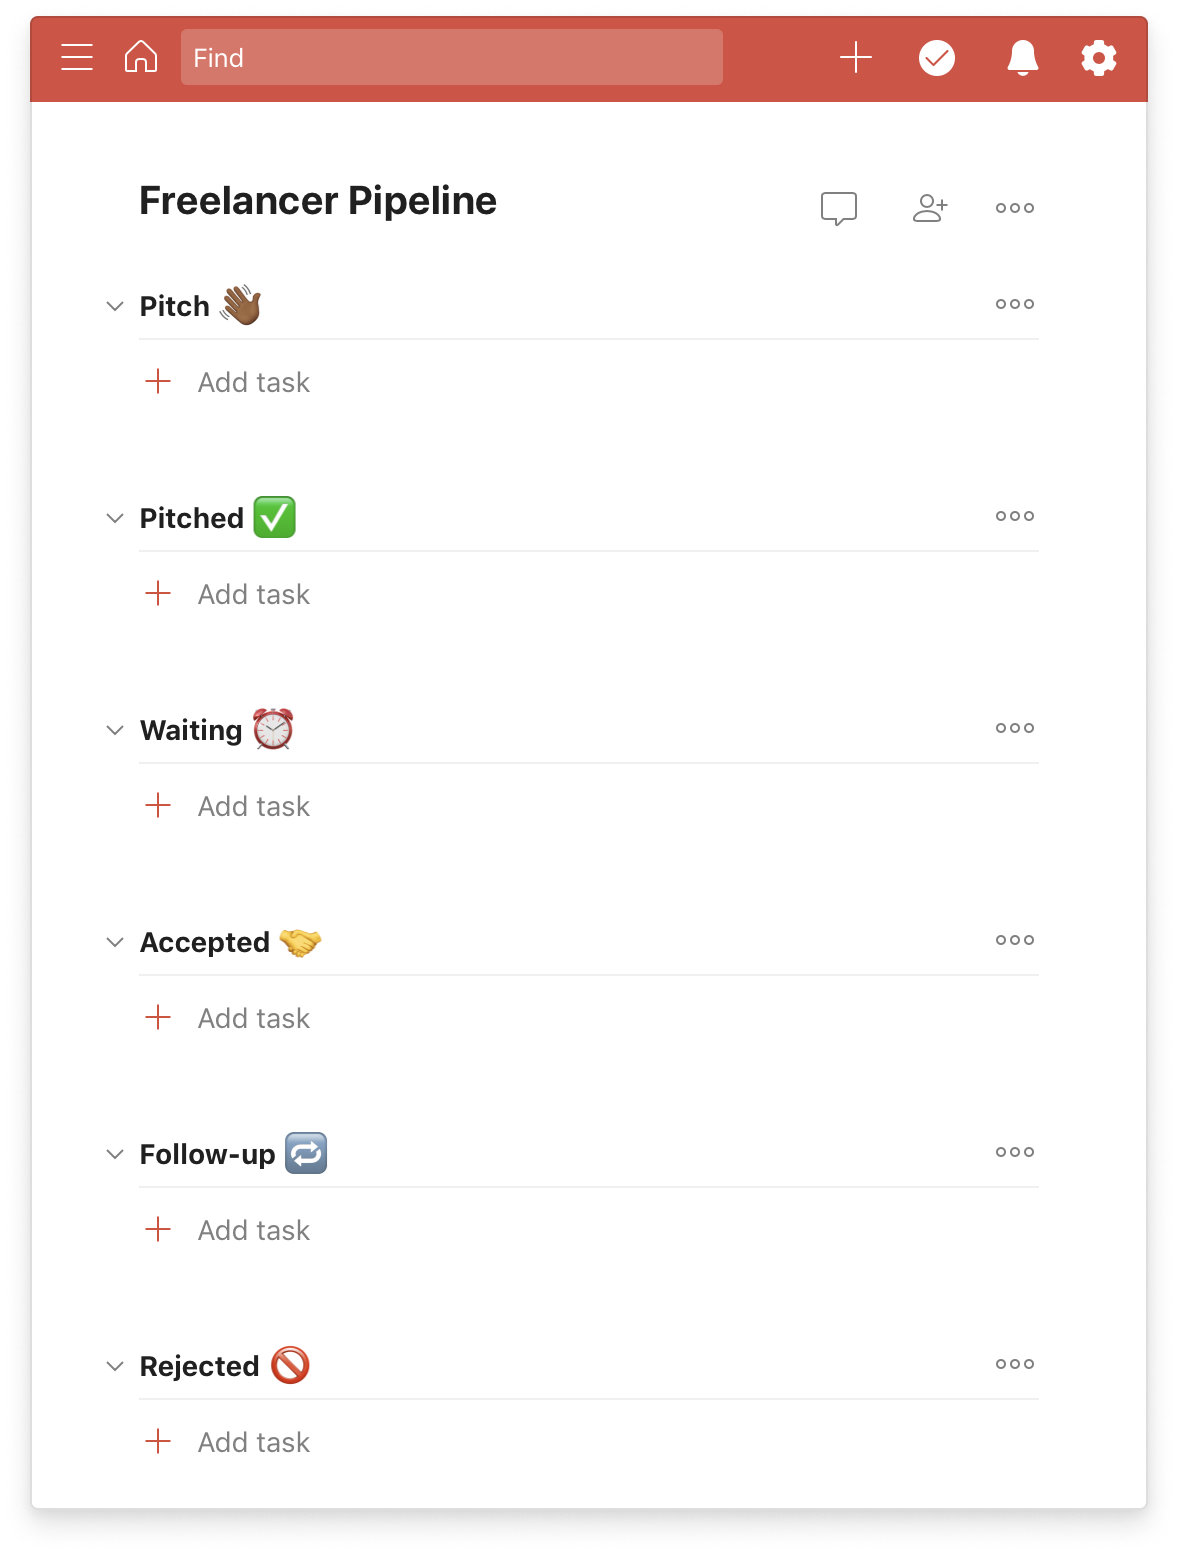 Use Todoist Sections to create a Freelancer Pipeline